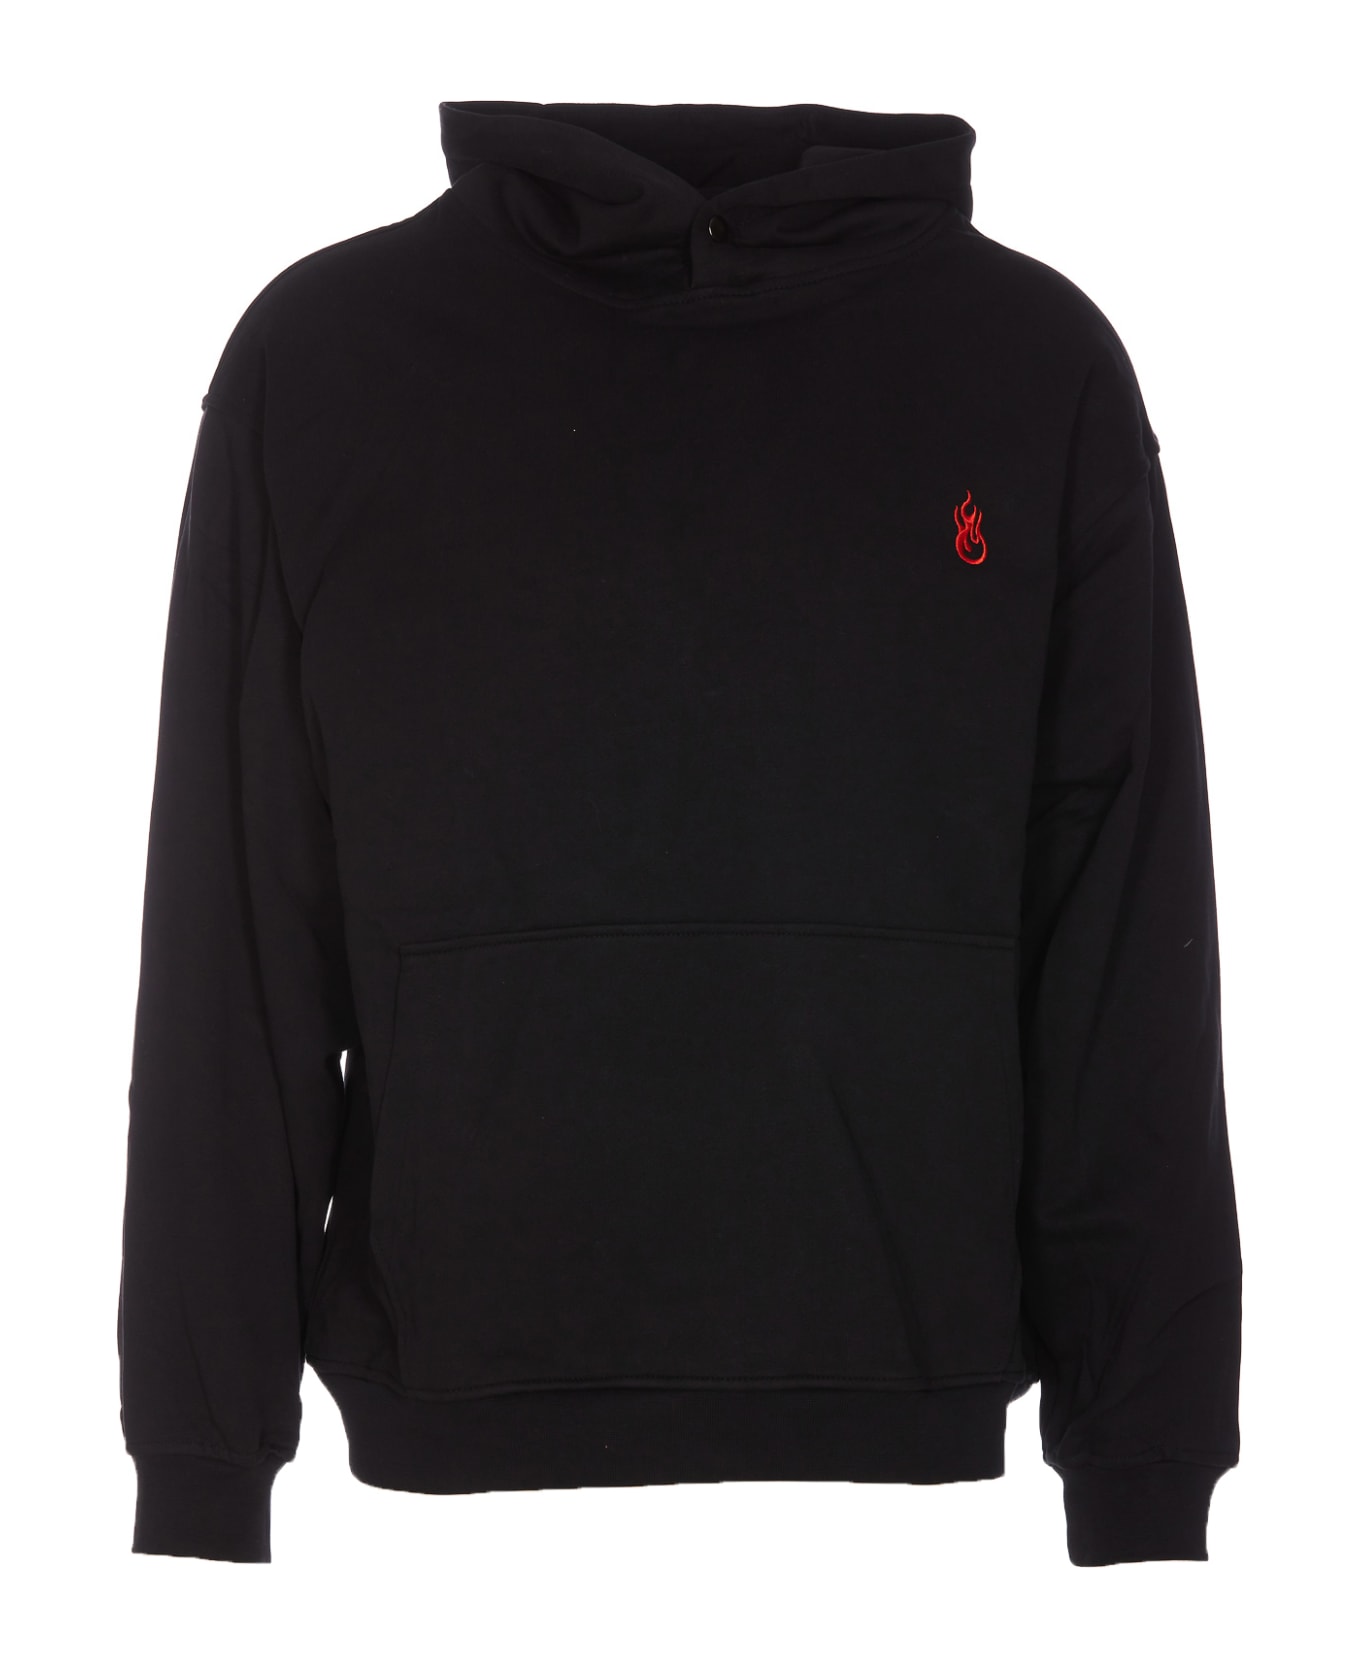 Vision of Super Hoodie With Flames Logo - BLACK